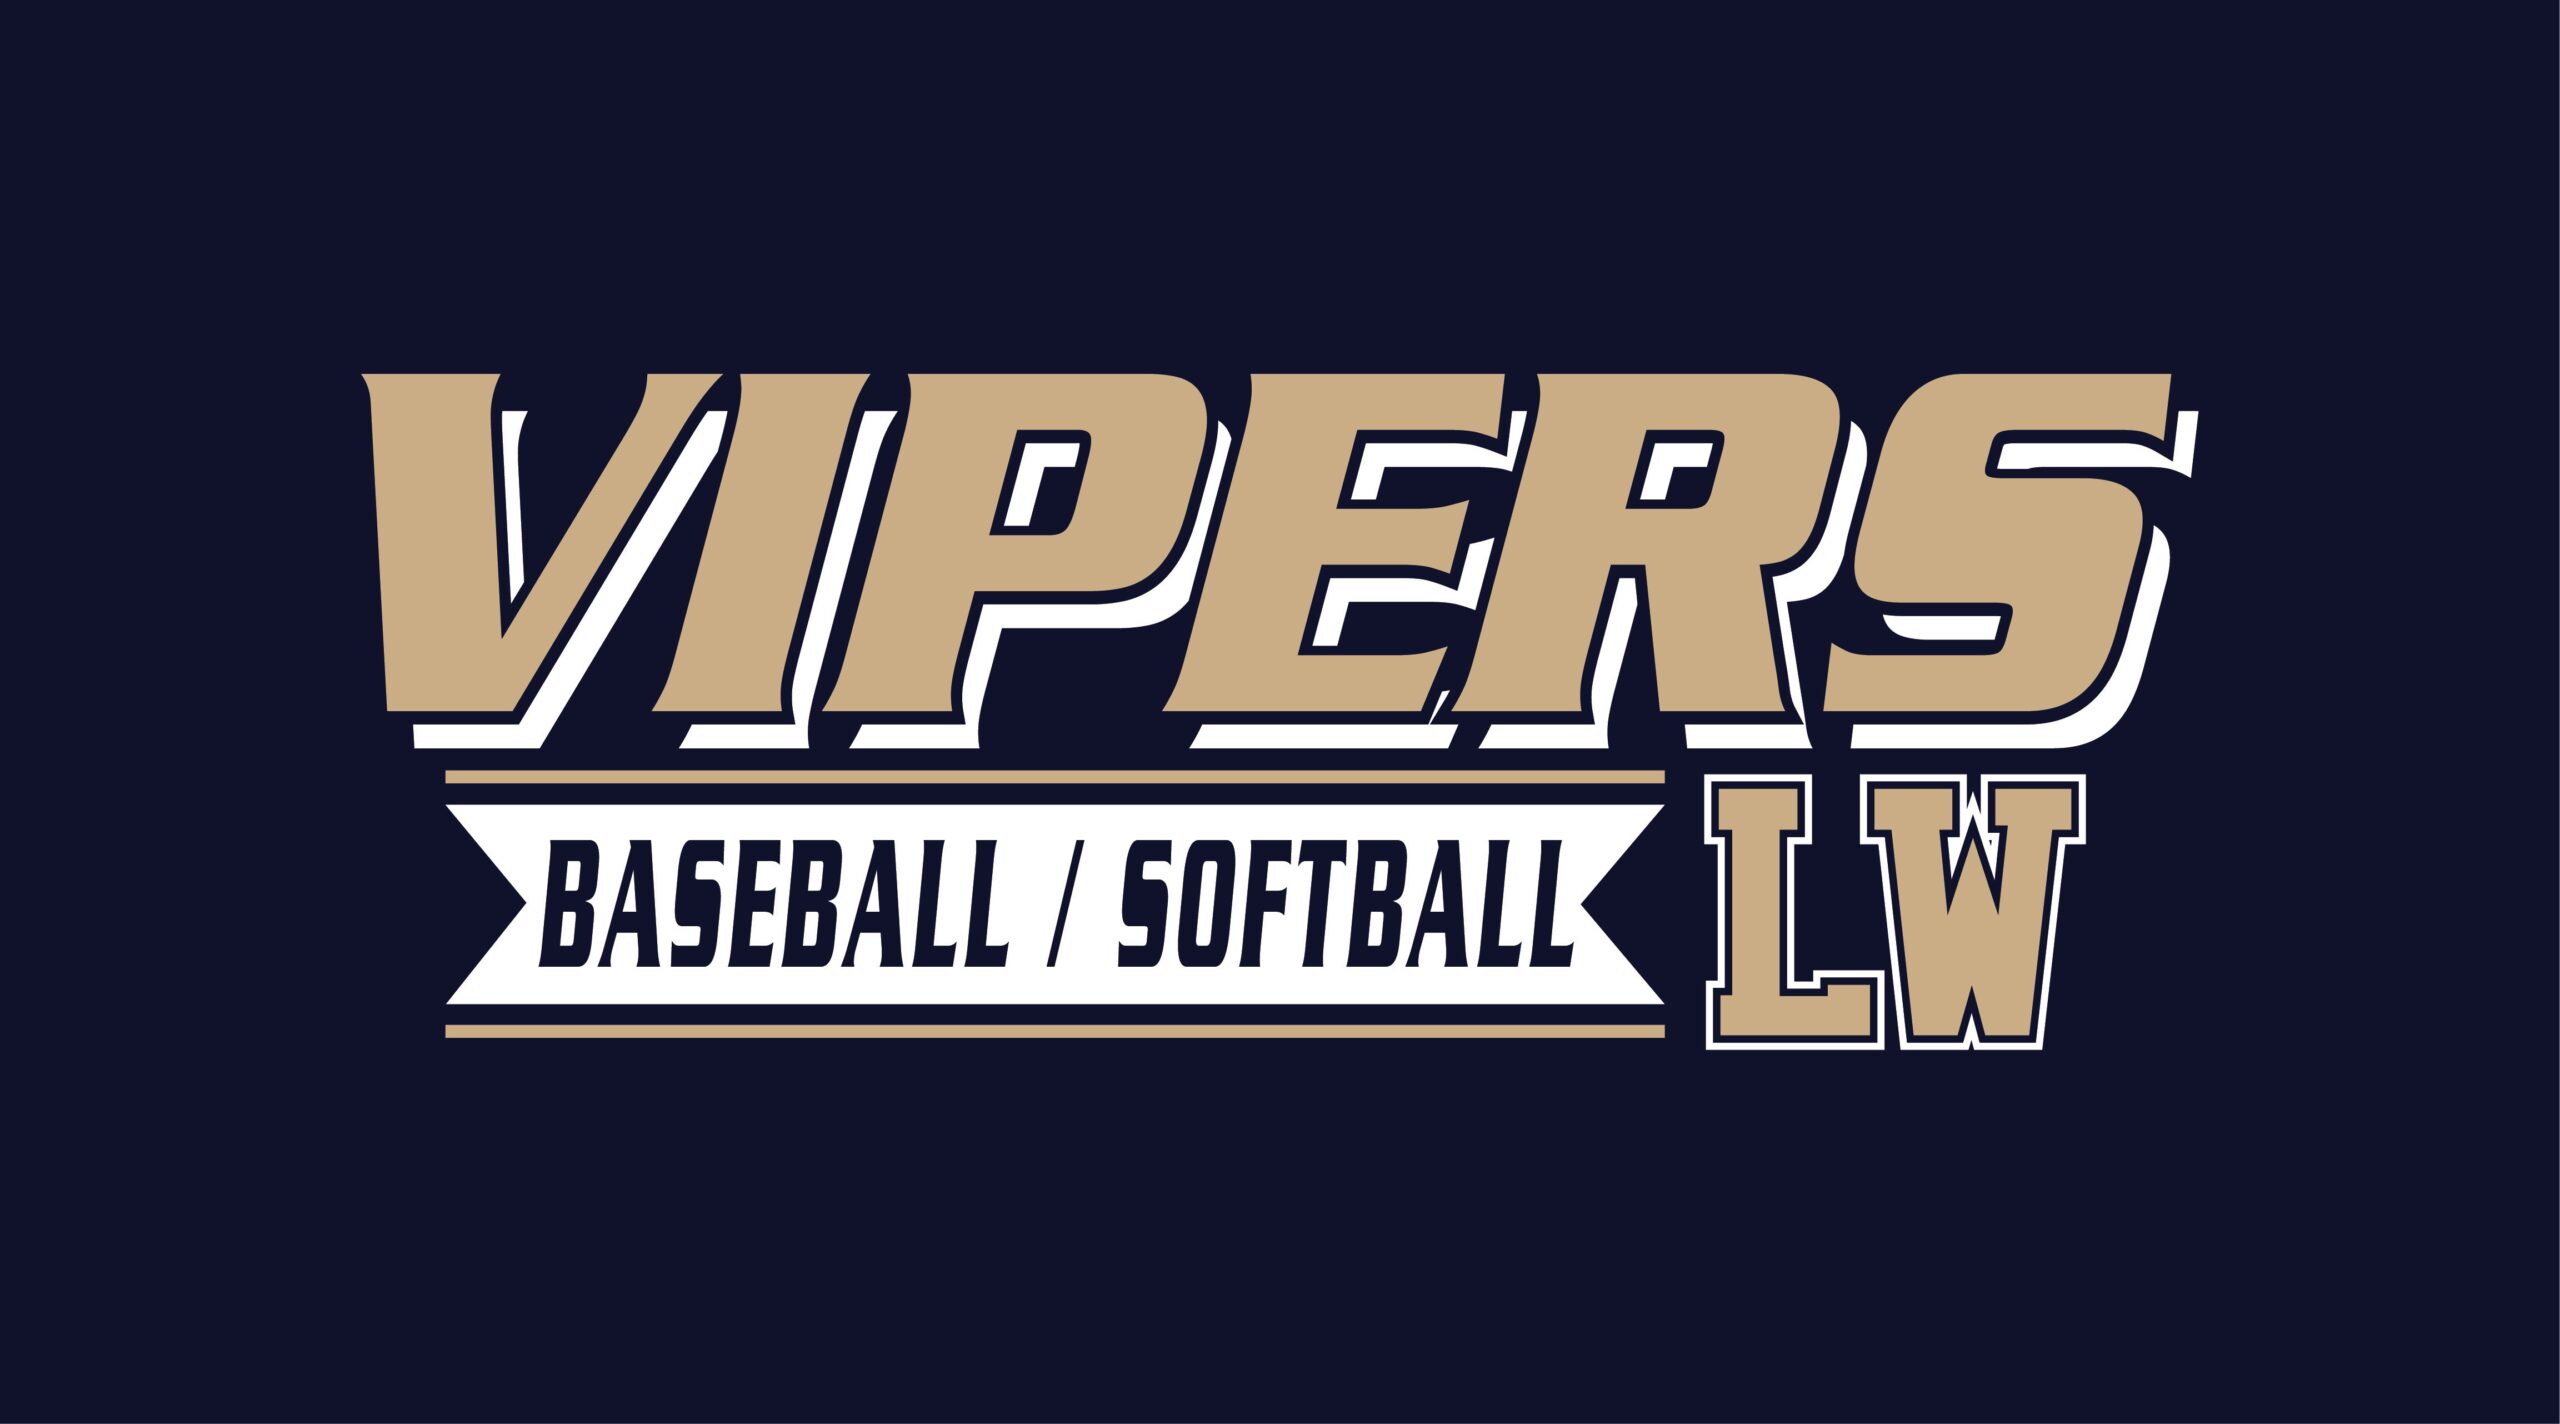 Lincoln Way Vipers